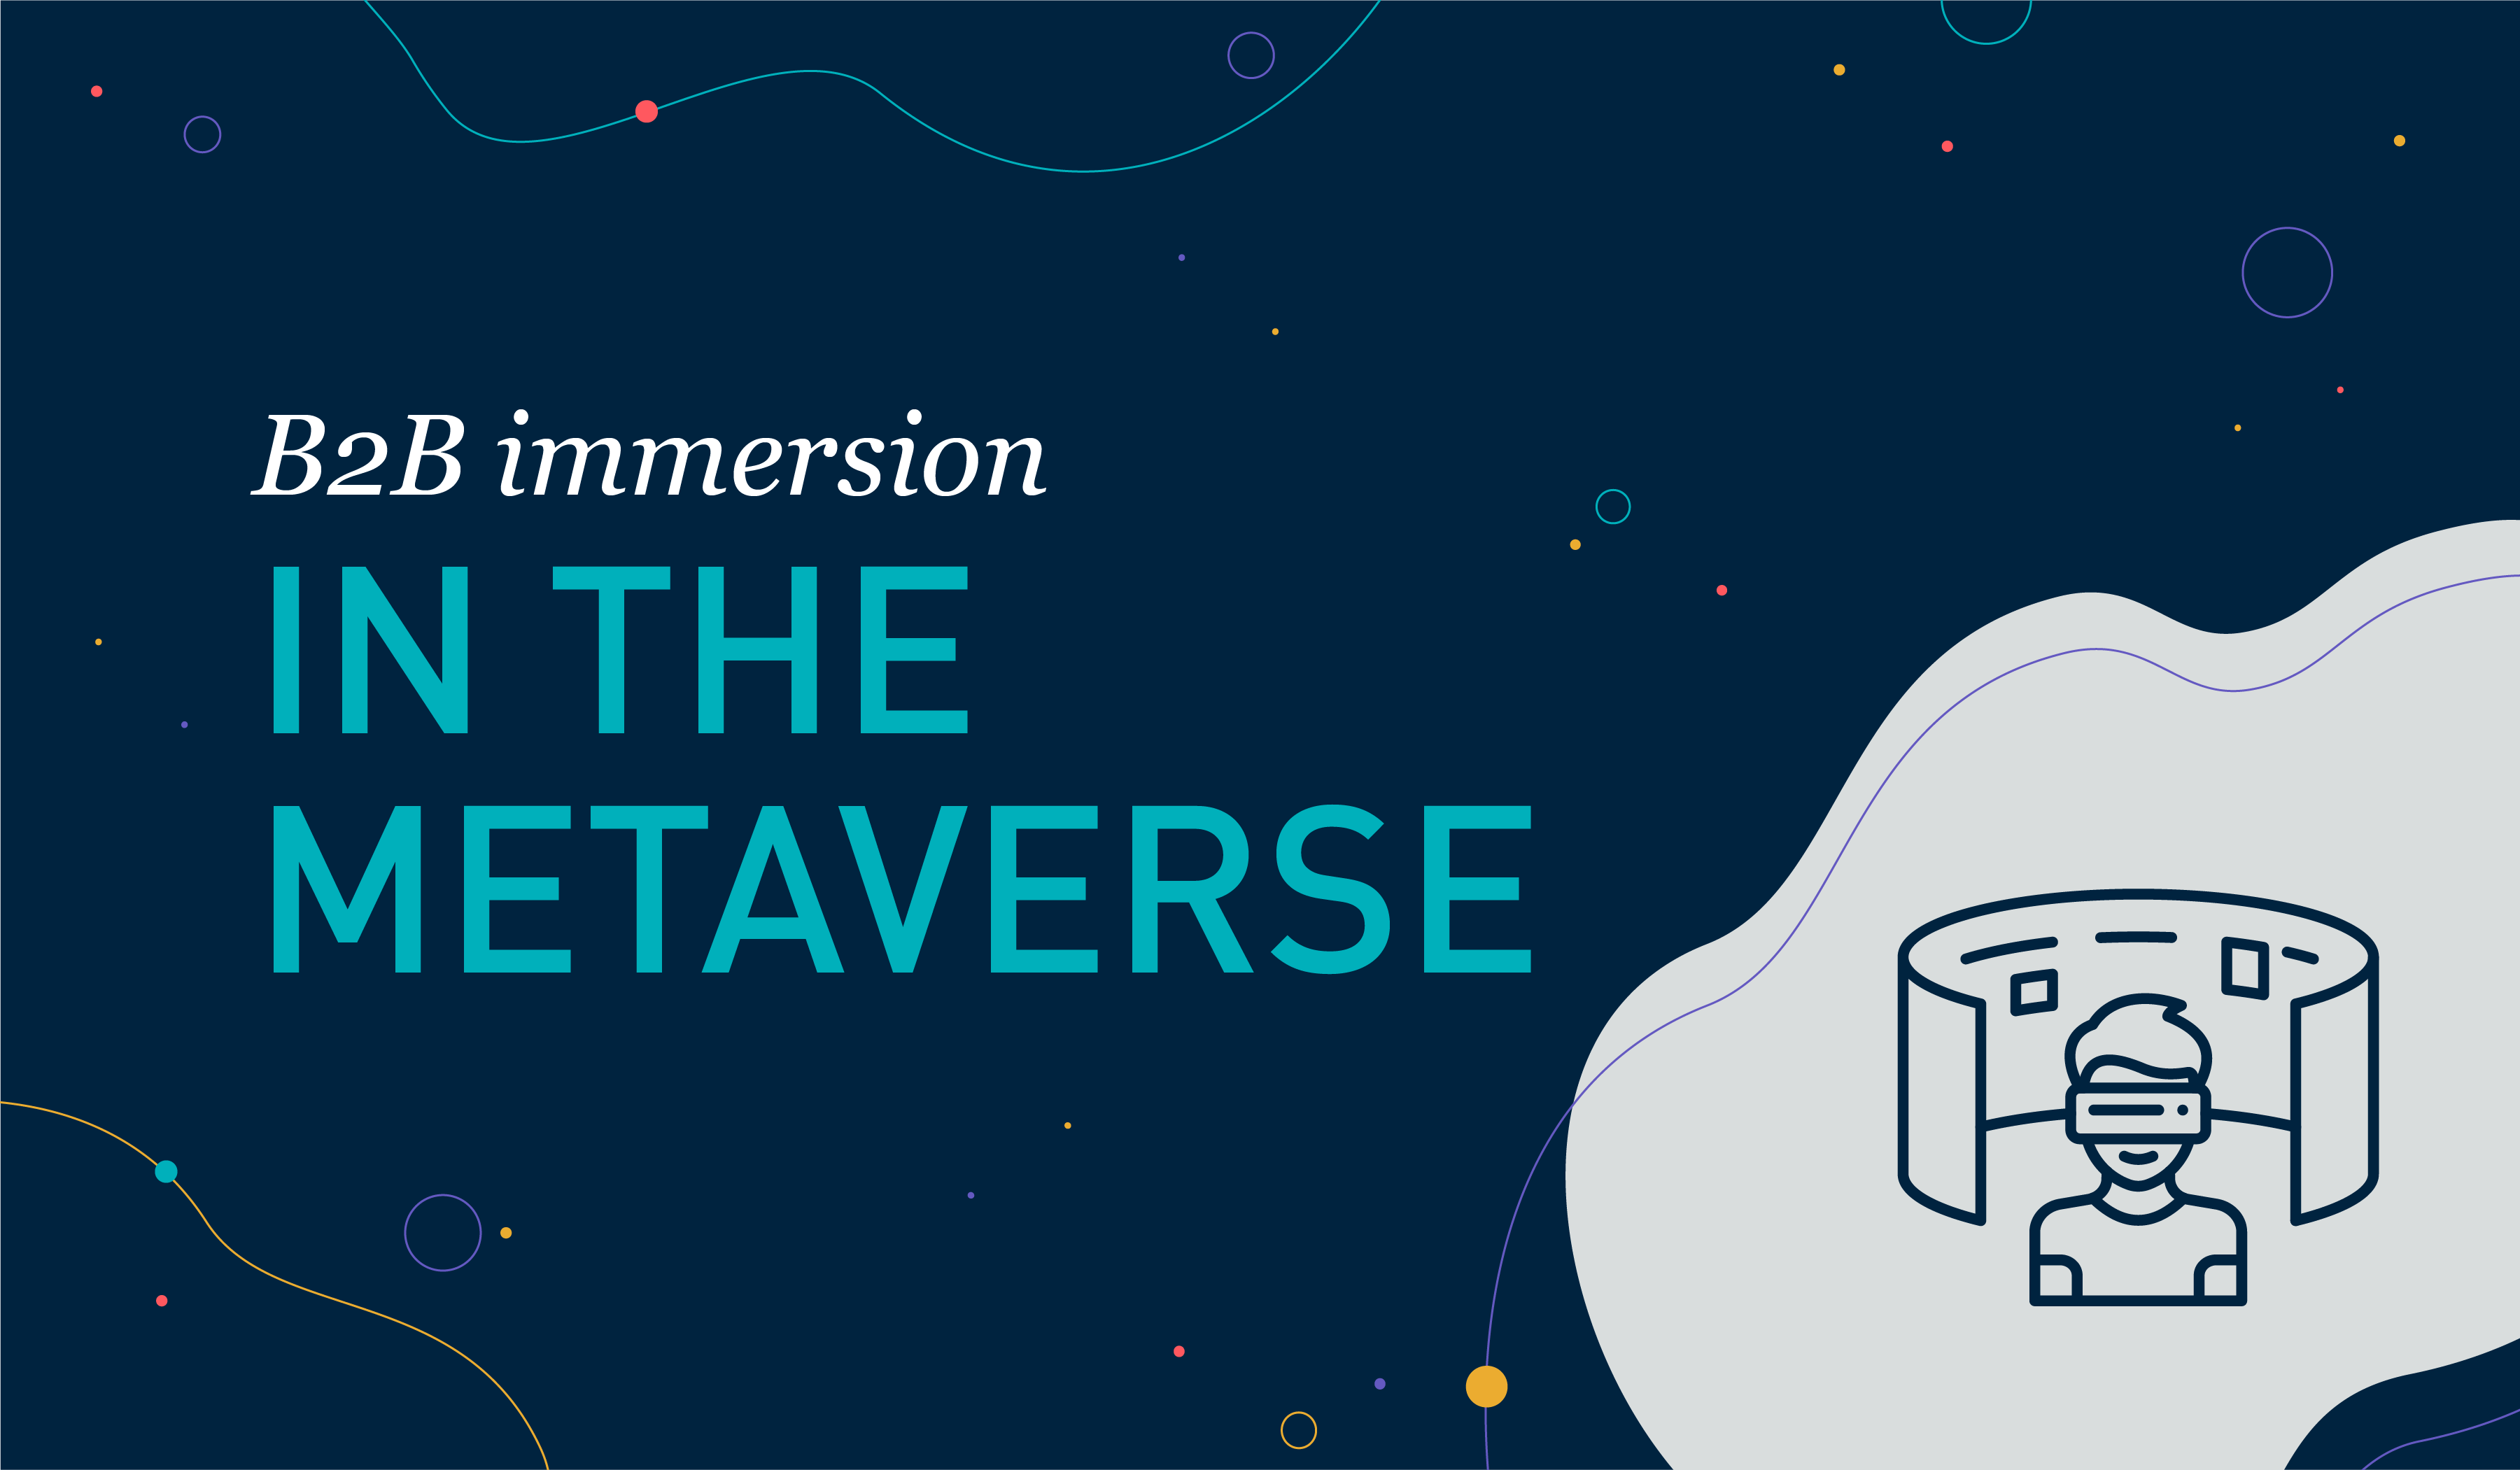 B2B Marketing & Immersion in the Metaverse - Web3 How B2B Marketers can Engage in the Metaverse